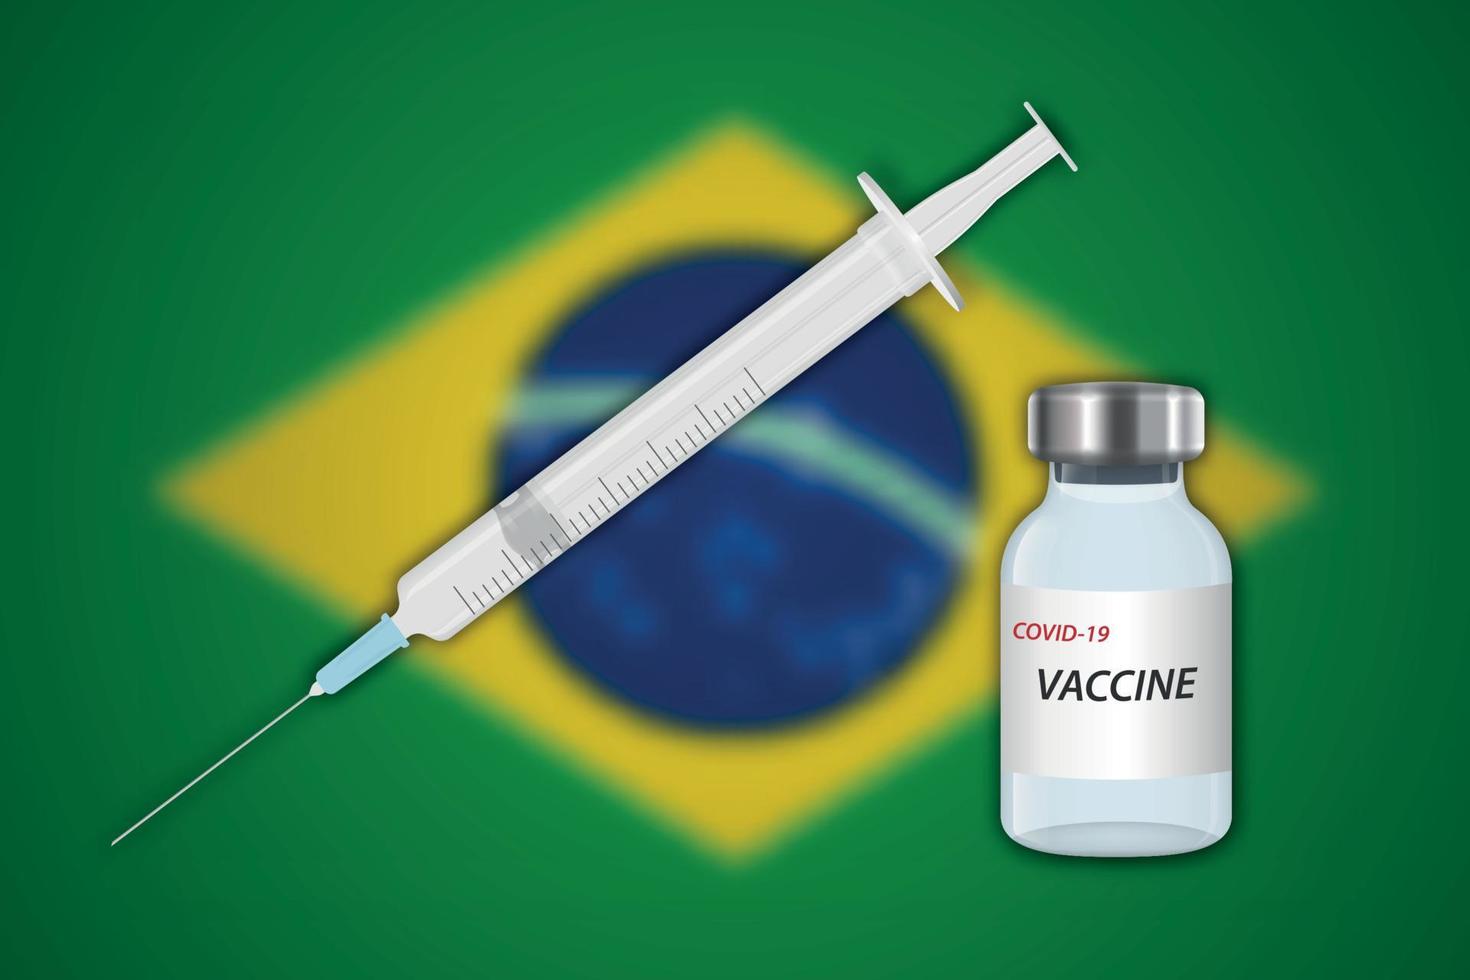 Syringe and vaccine vial on blur background with Brazil flag vector